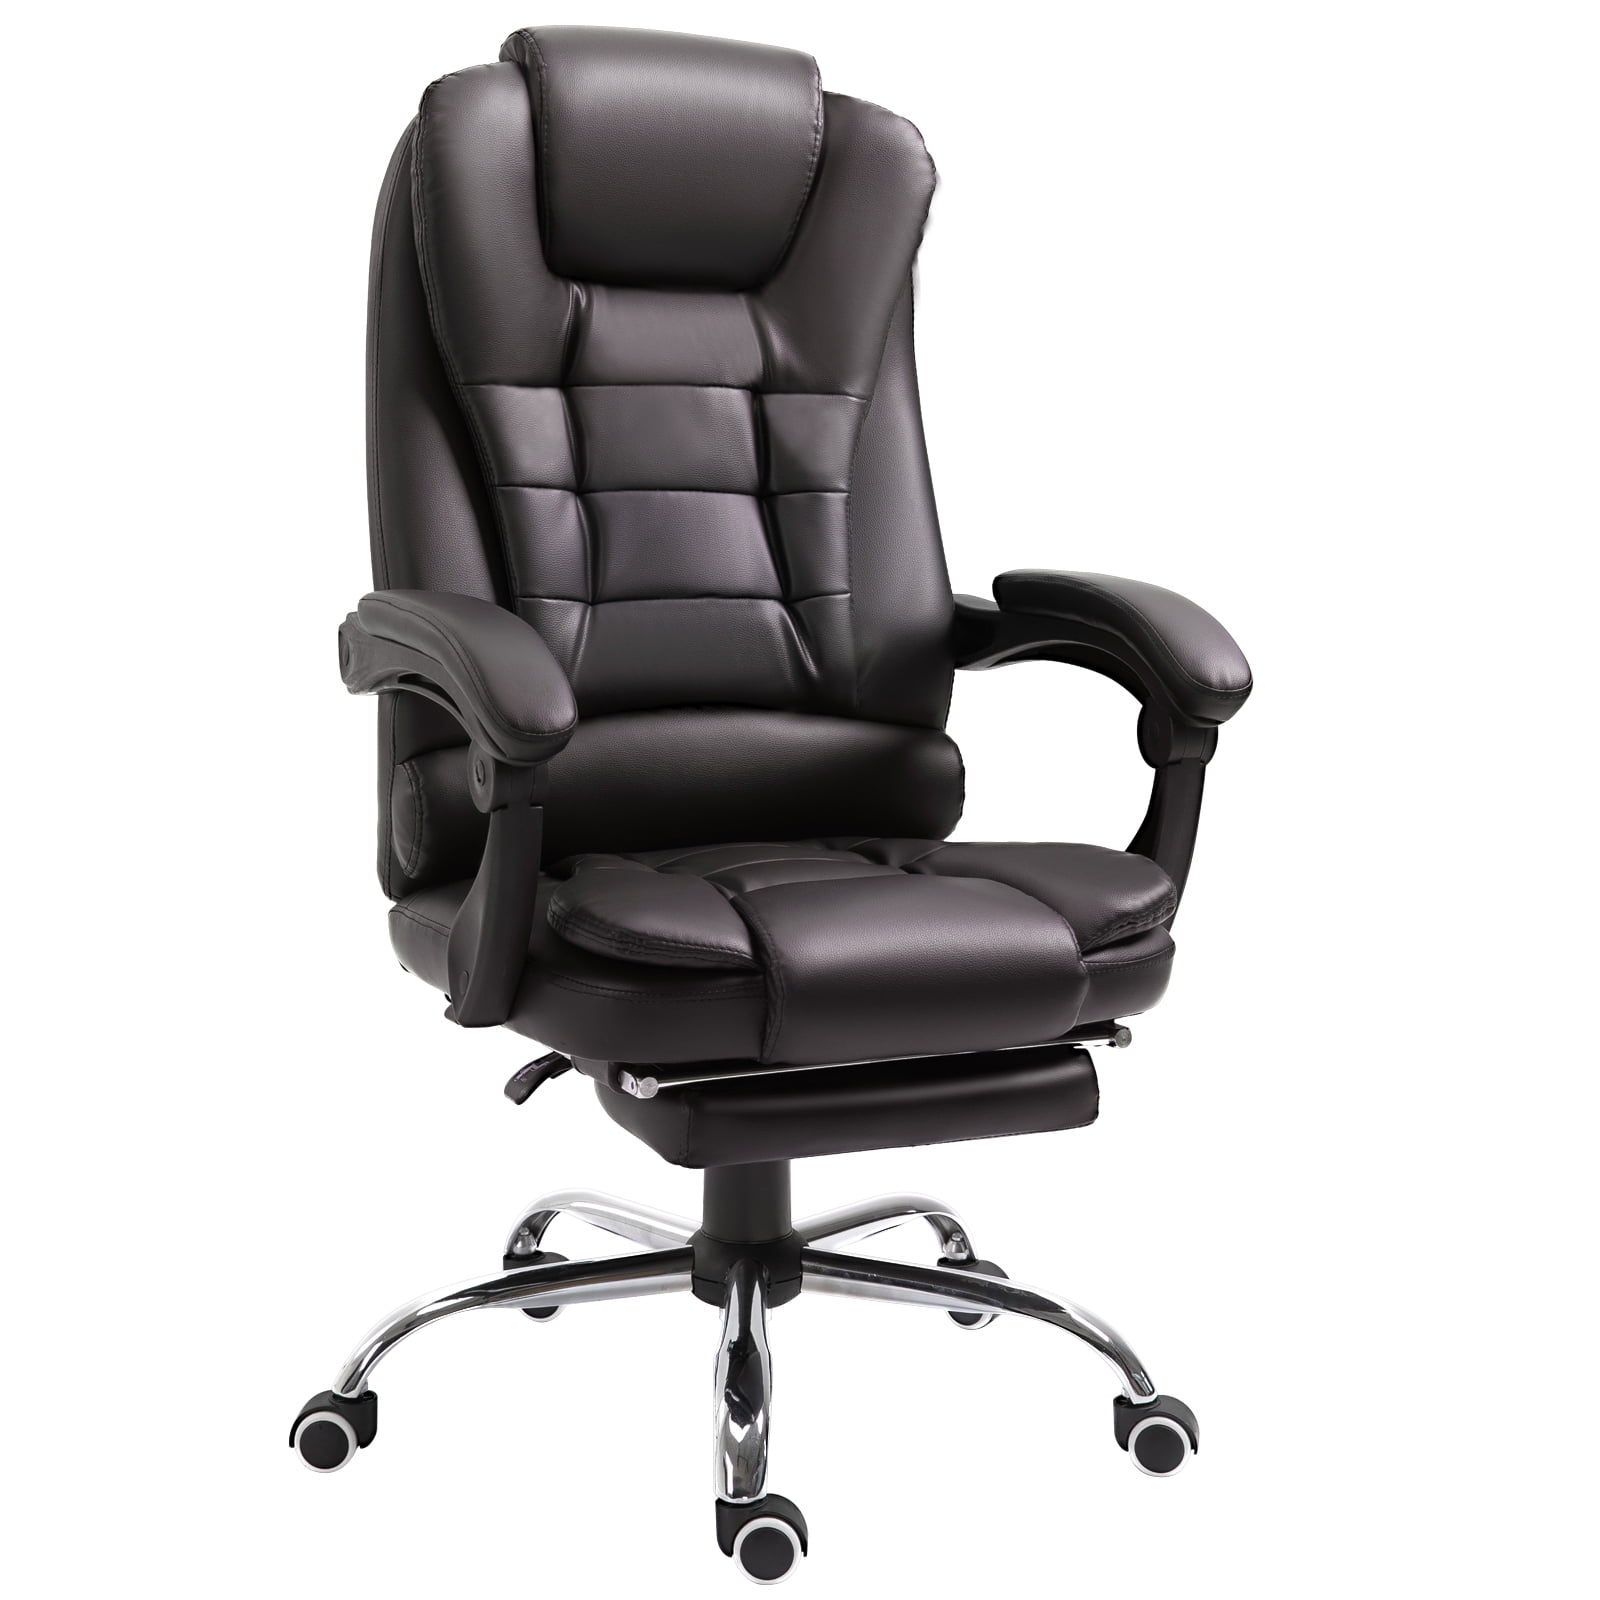 Black Executive High Back Leather Recliner Office Chair Desk Armchair Footrest 